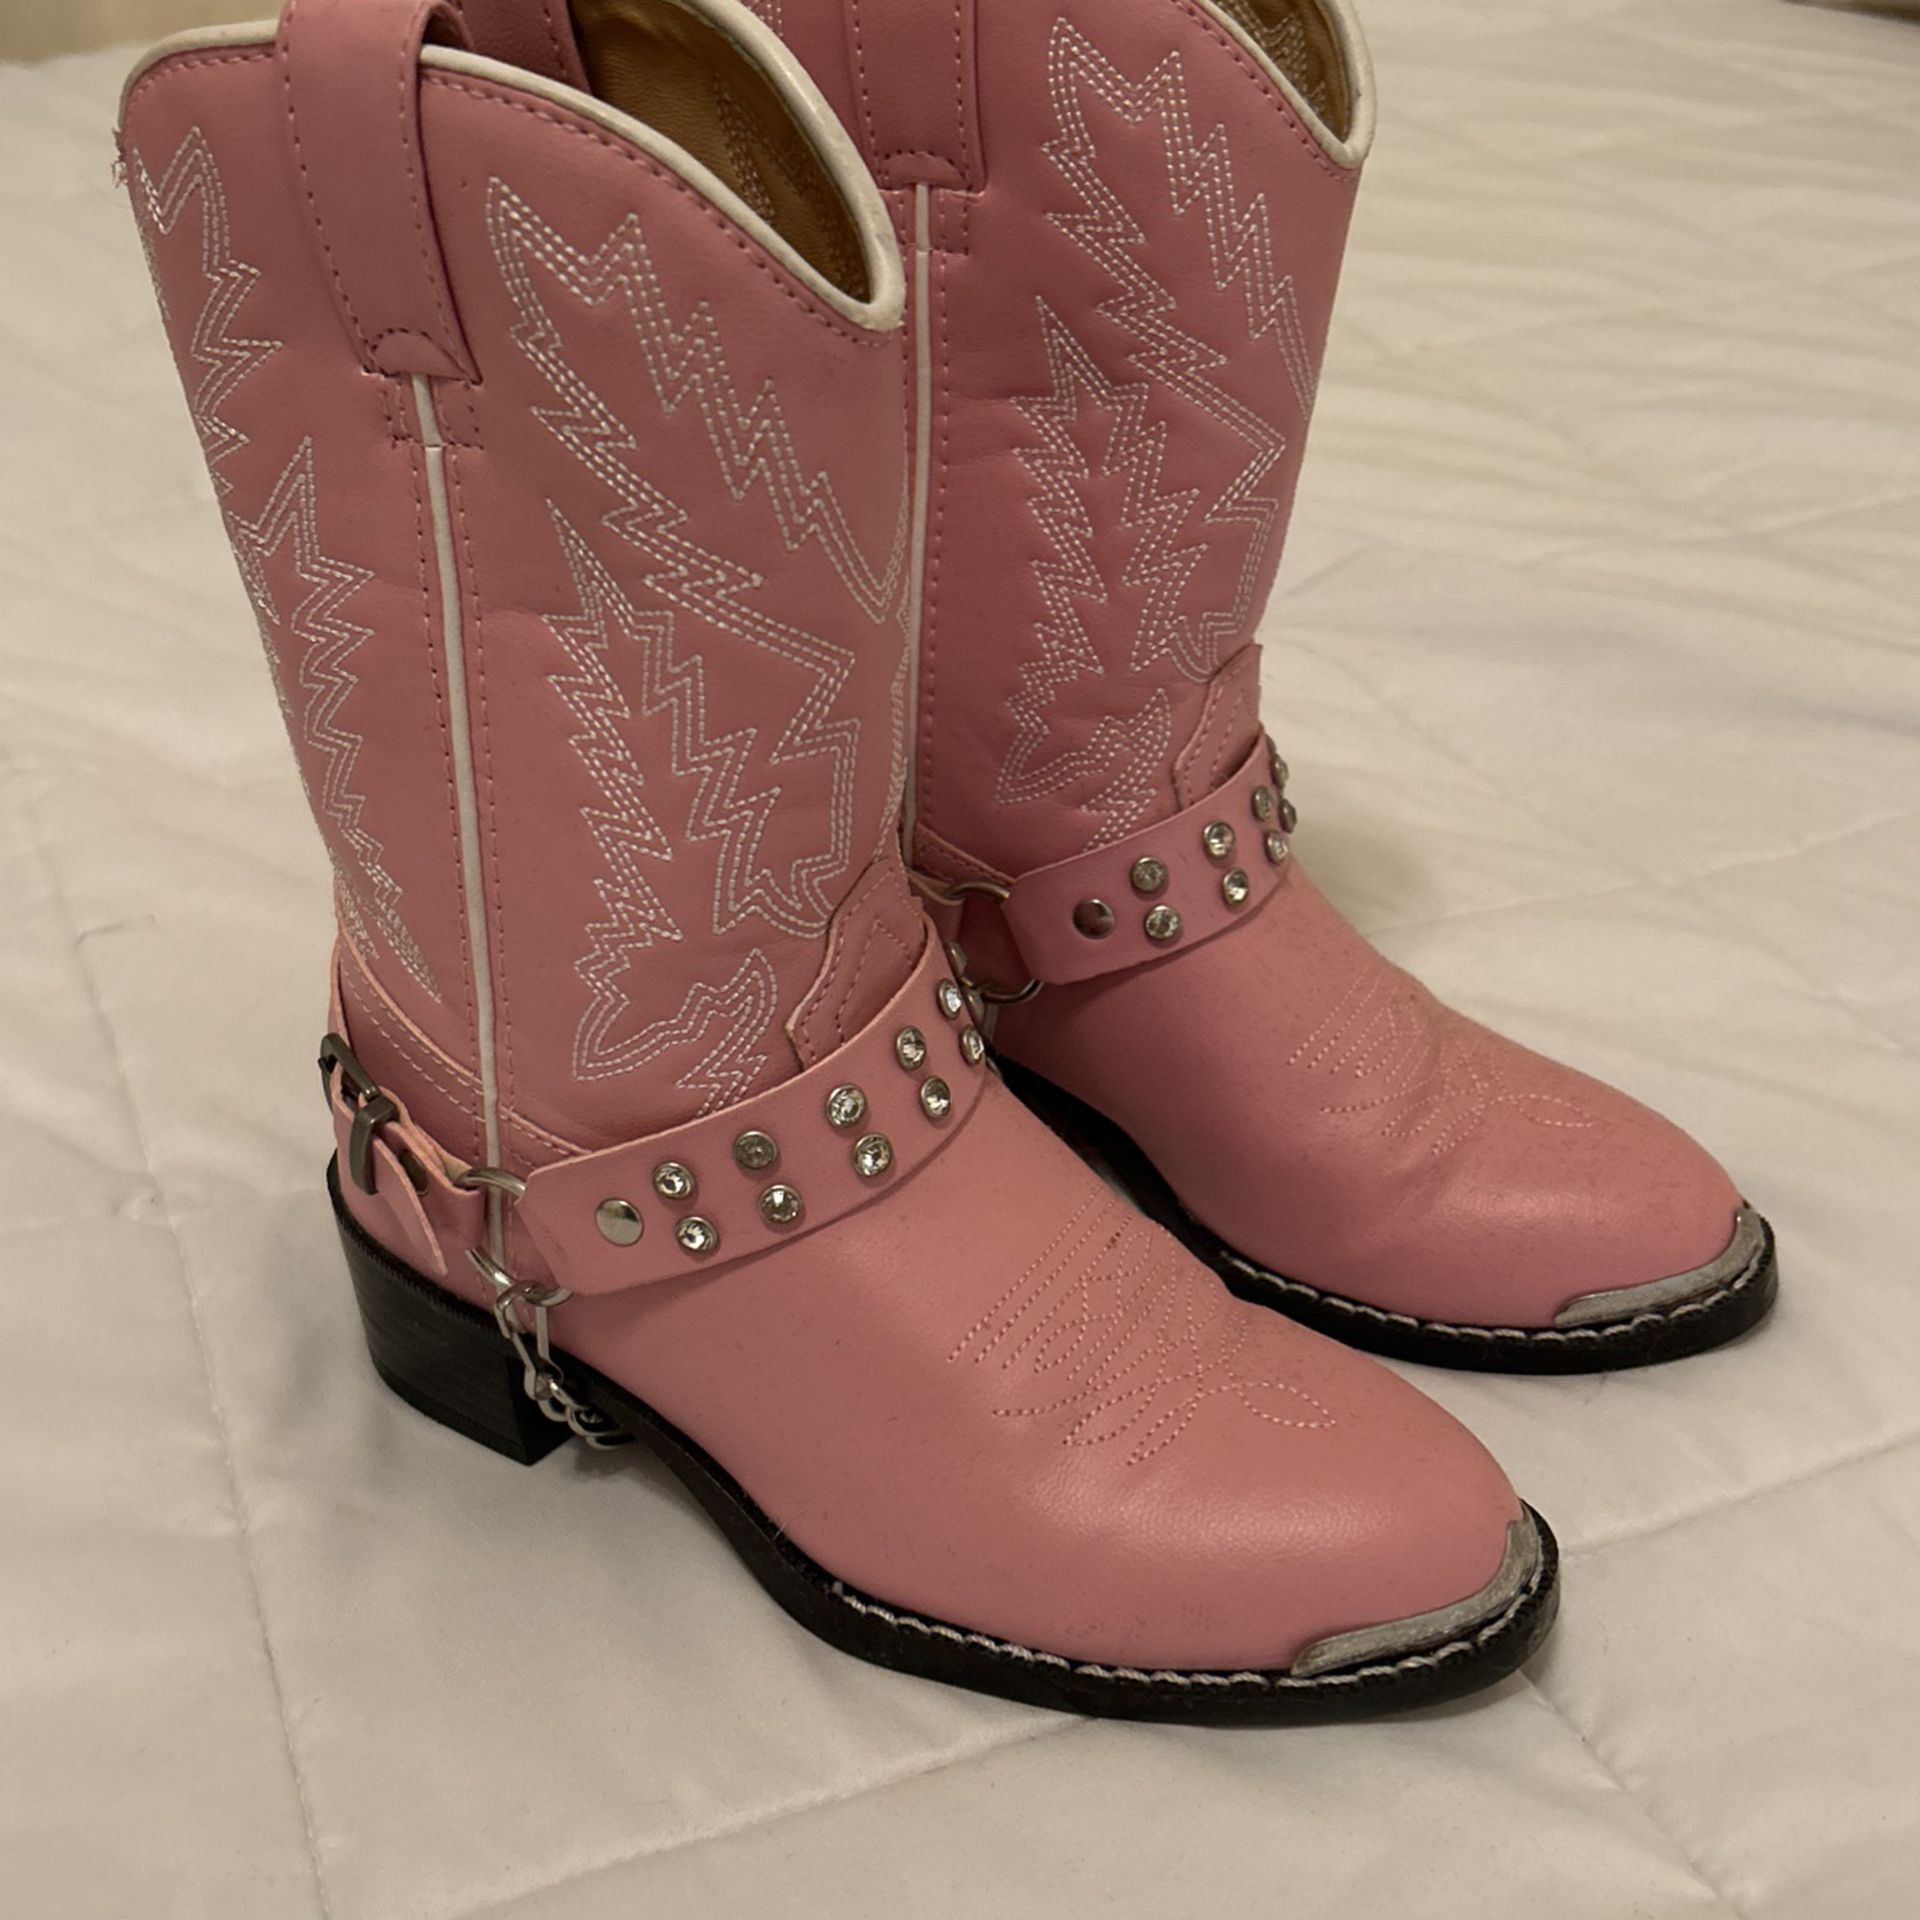 Girls pink Western Boots With Rhinestones